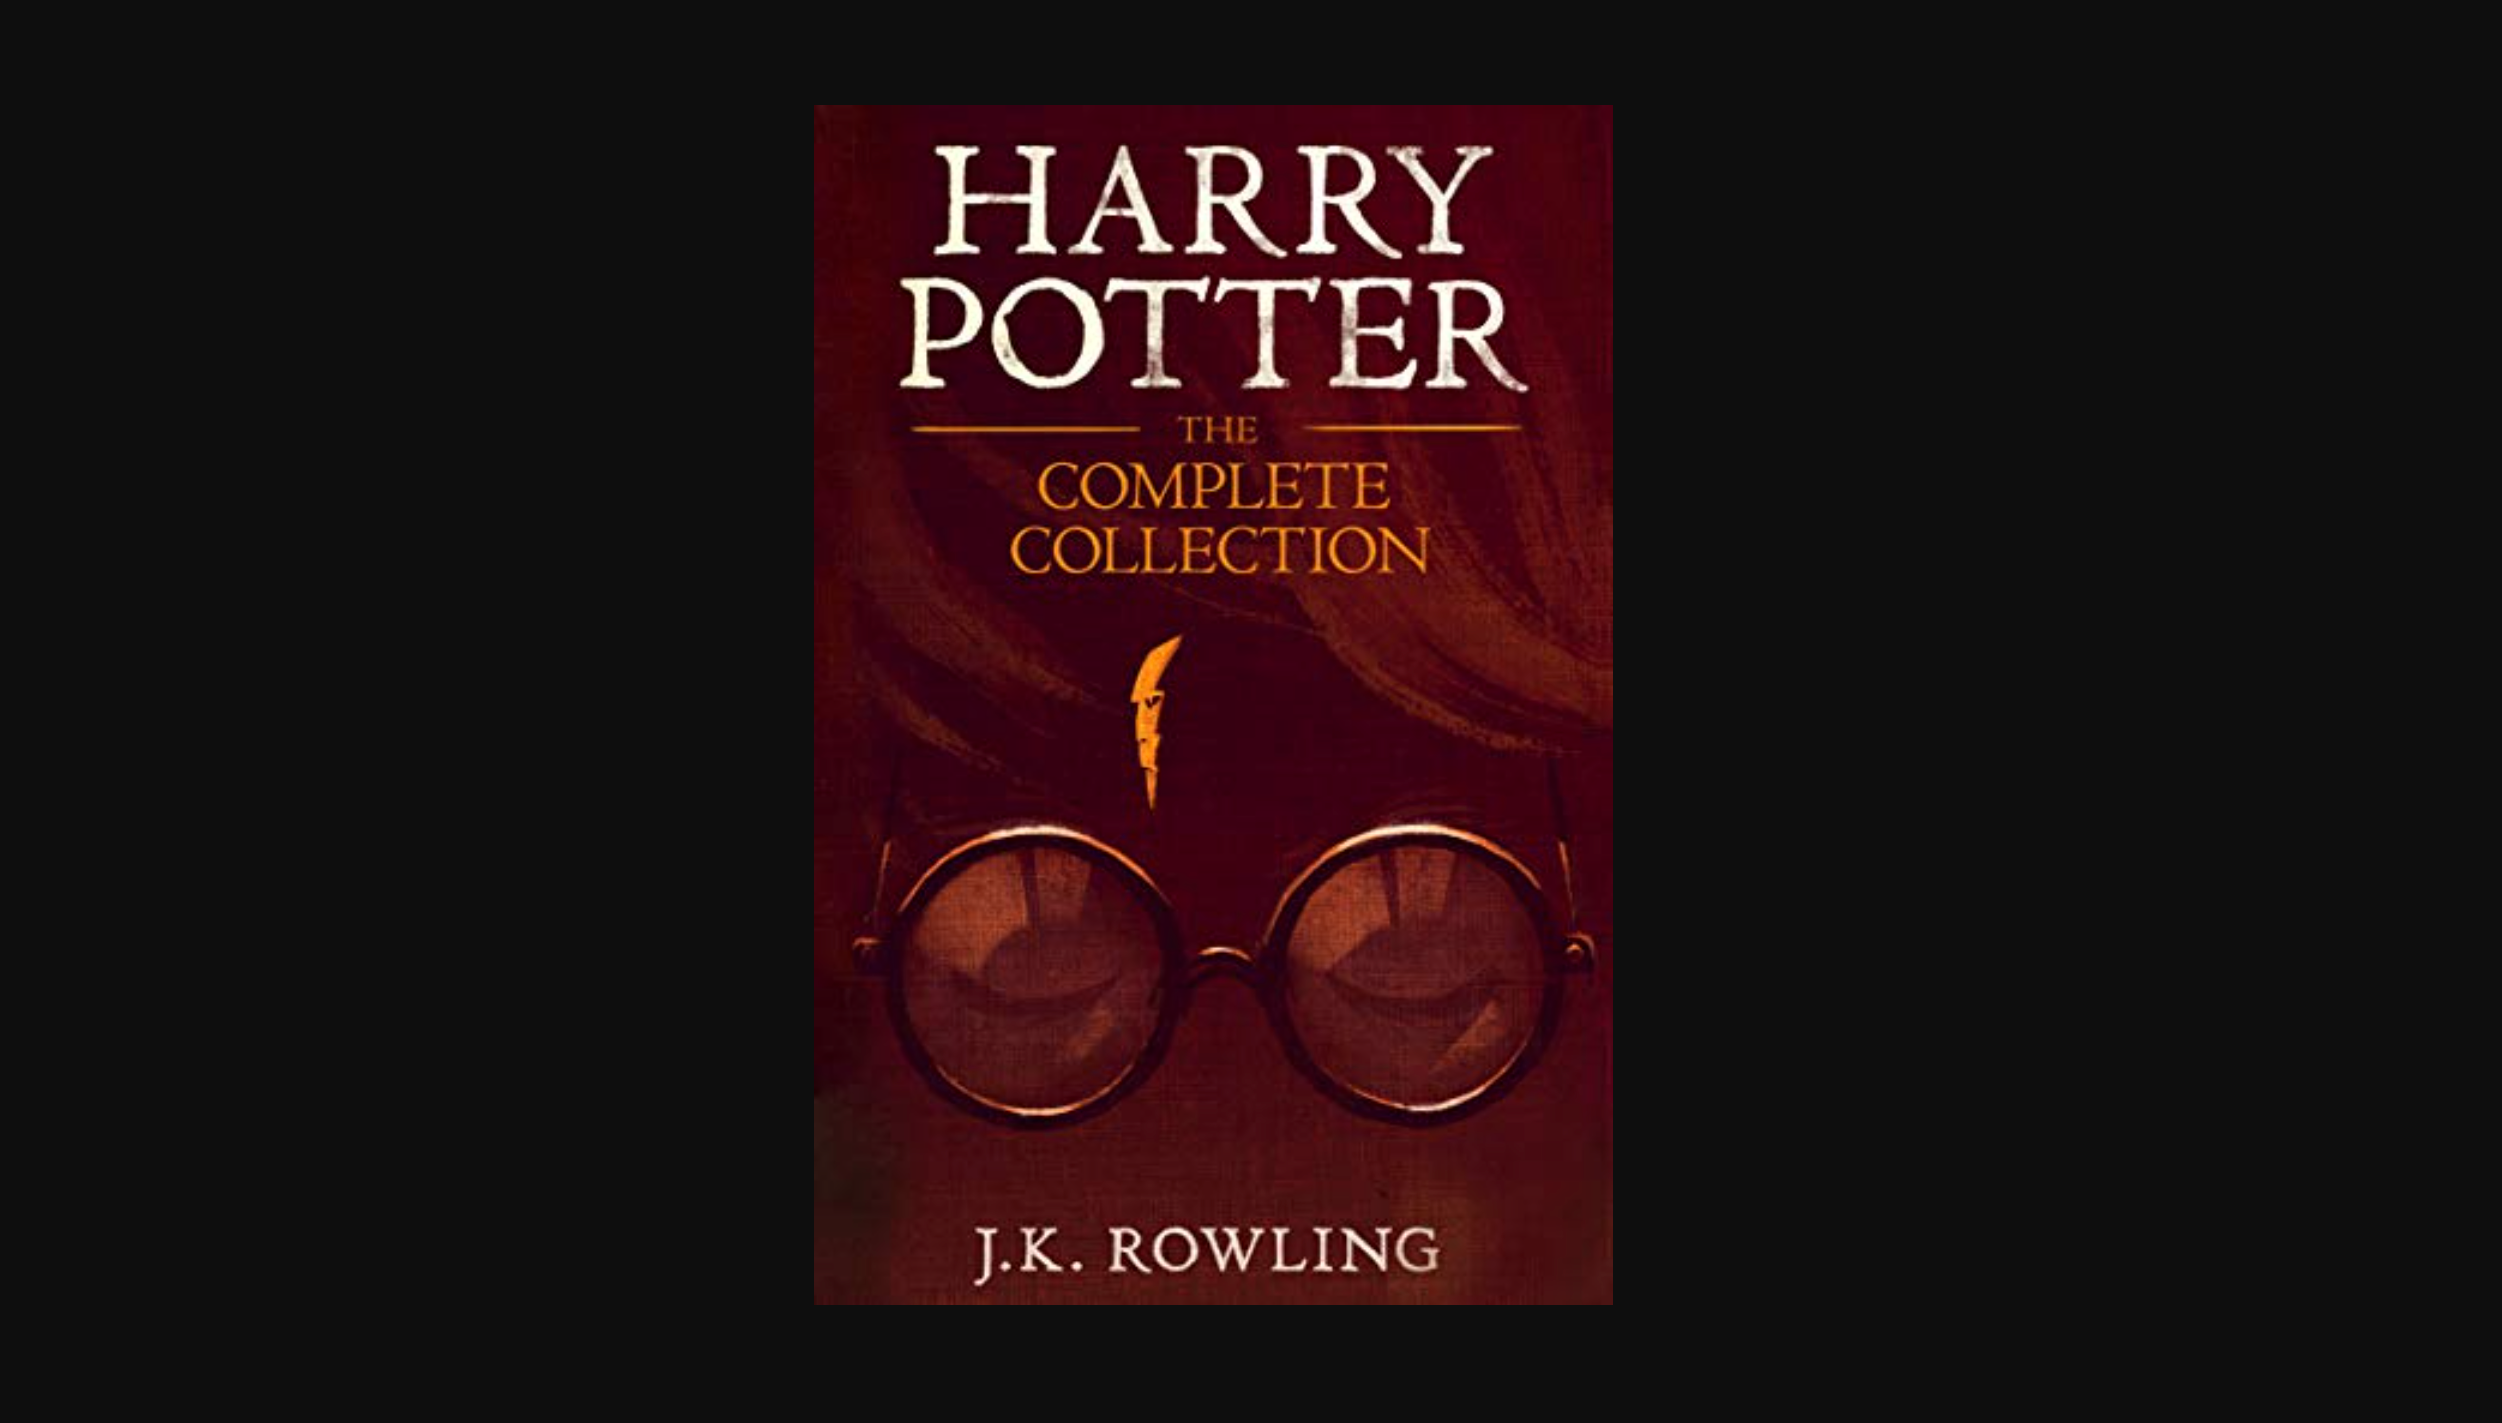 Can I read the Harry Potter books on my Kindle? 2